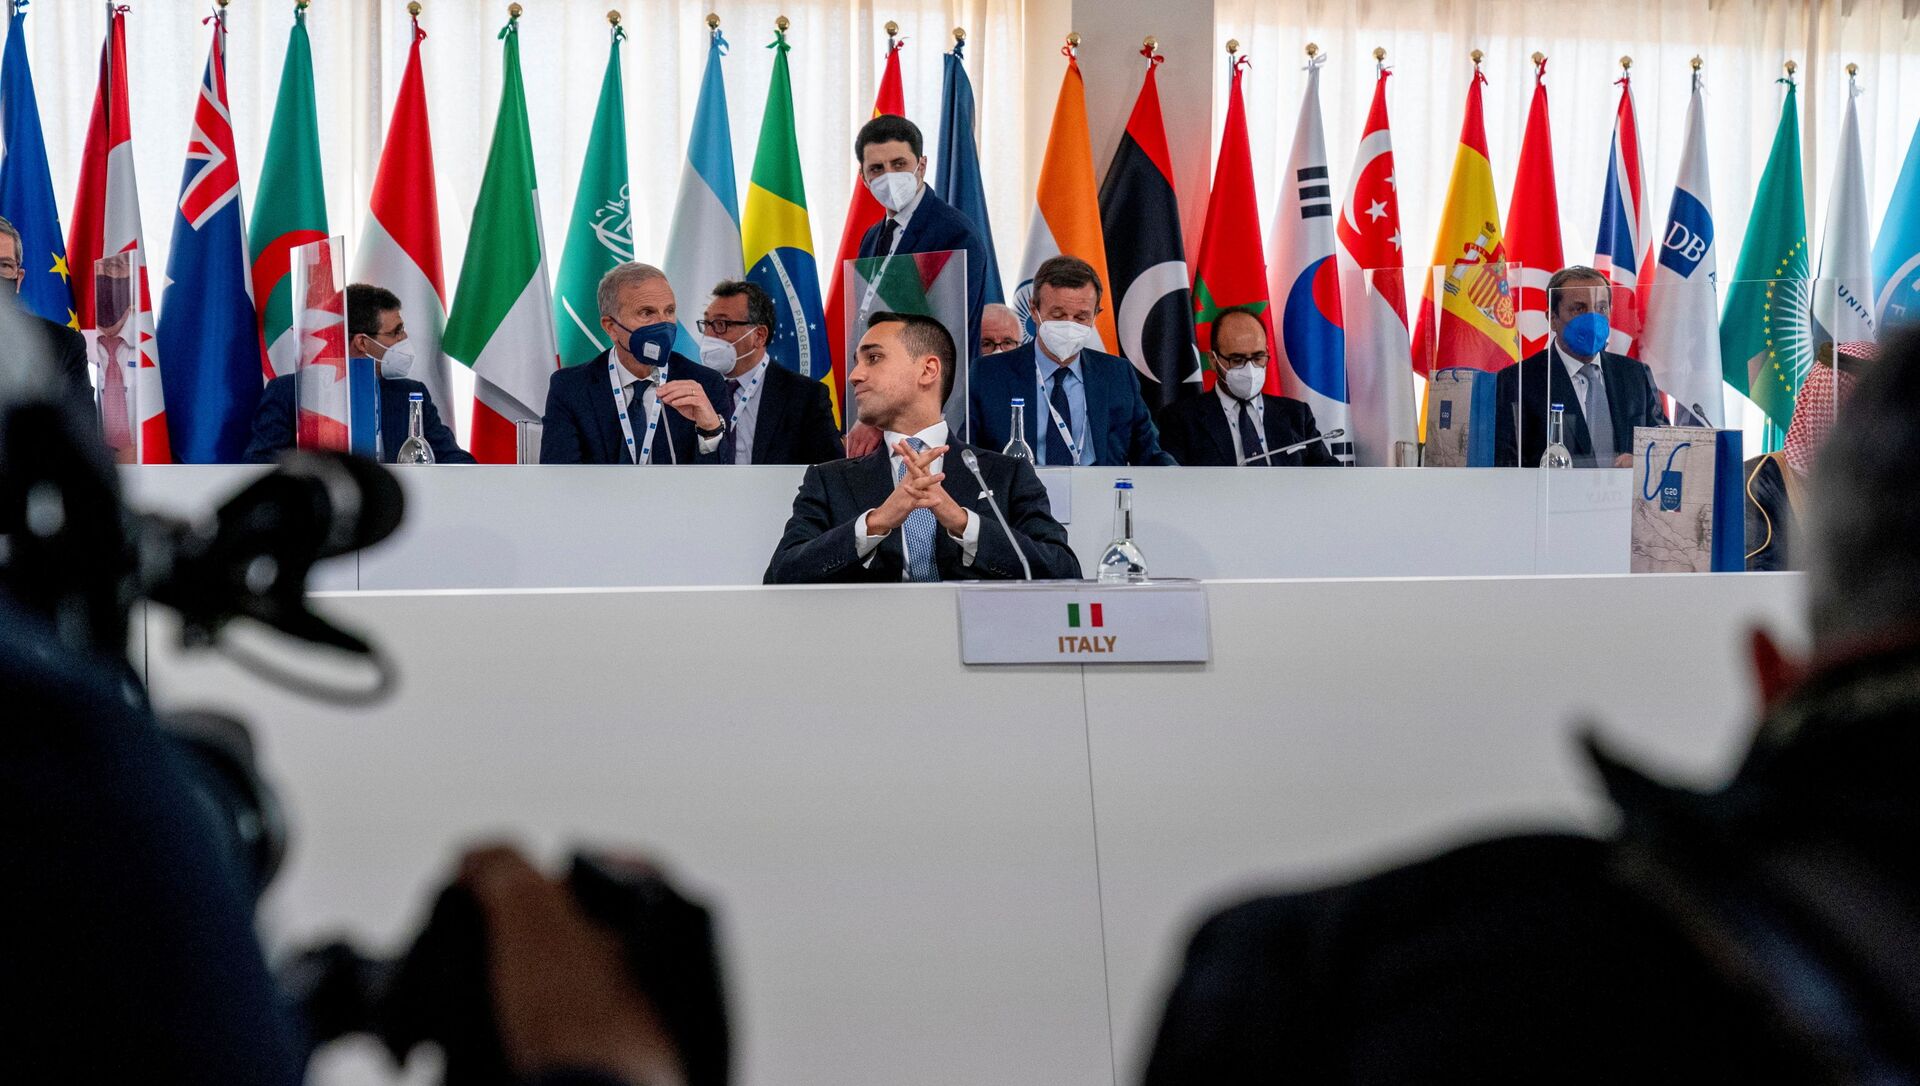 Italy's Foreign Minister Luigi Di Maio sits down to begin a G20 foreign ministers meeting in Matera, Italy June 29, 2021. - Sputnik International, 1920, 29.06.2021